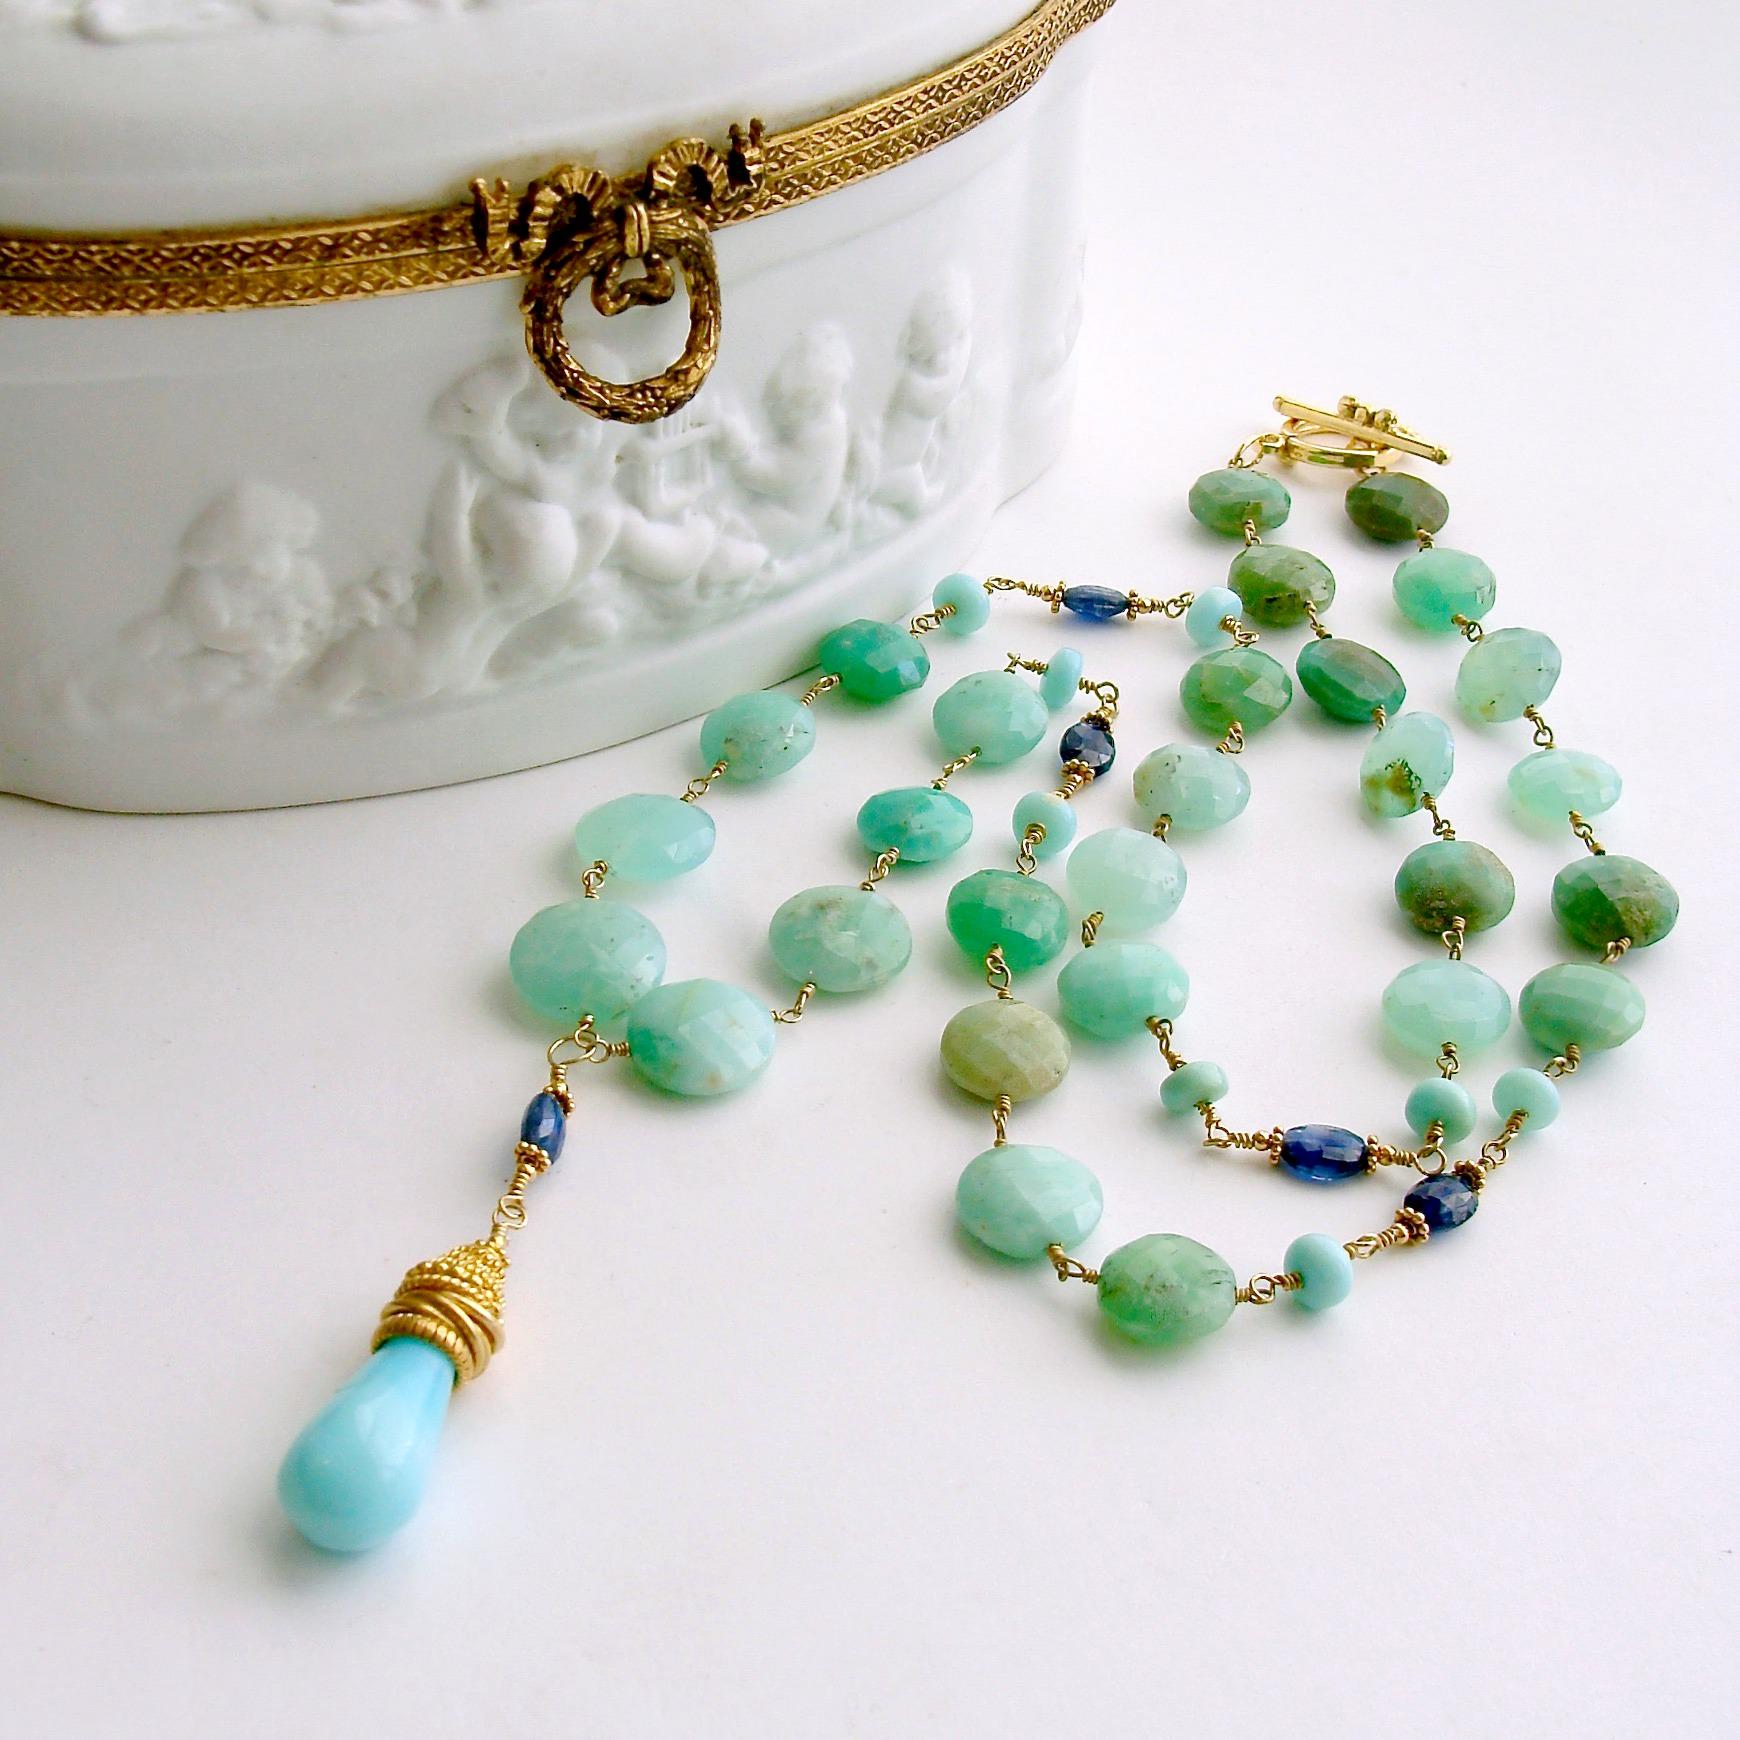 Beautiful faceted springtime mint green chrysoprase coins are the harbinger of the 2020 pastel revolution.  Intermittent stations of Peruvian blue opal smooth rondelles flanking rich cobalt blue kyanite faceted oval beads adds texture and color